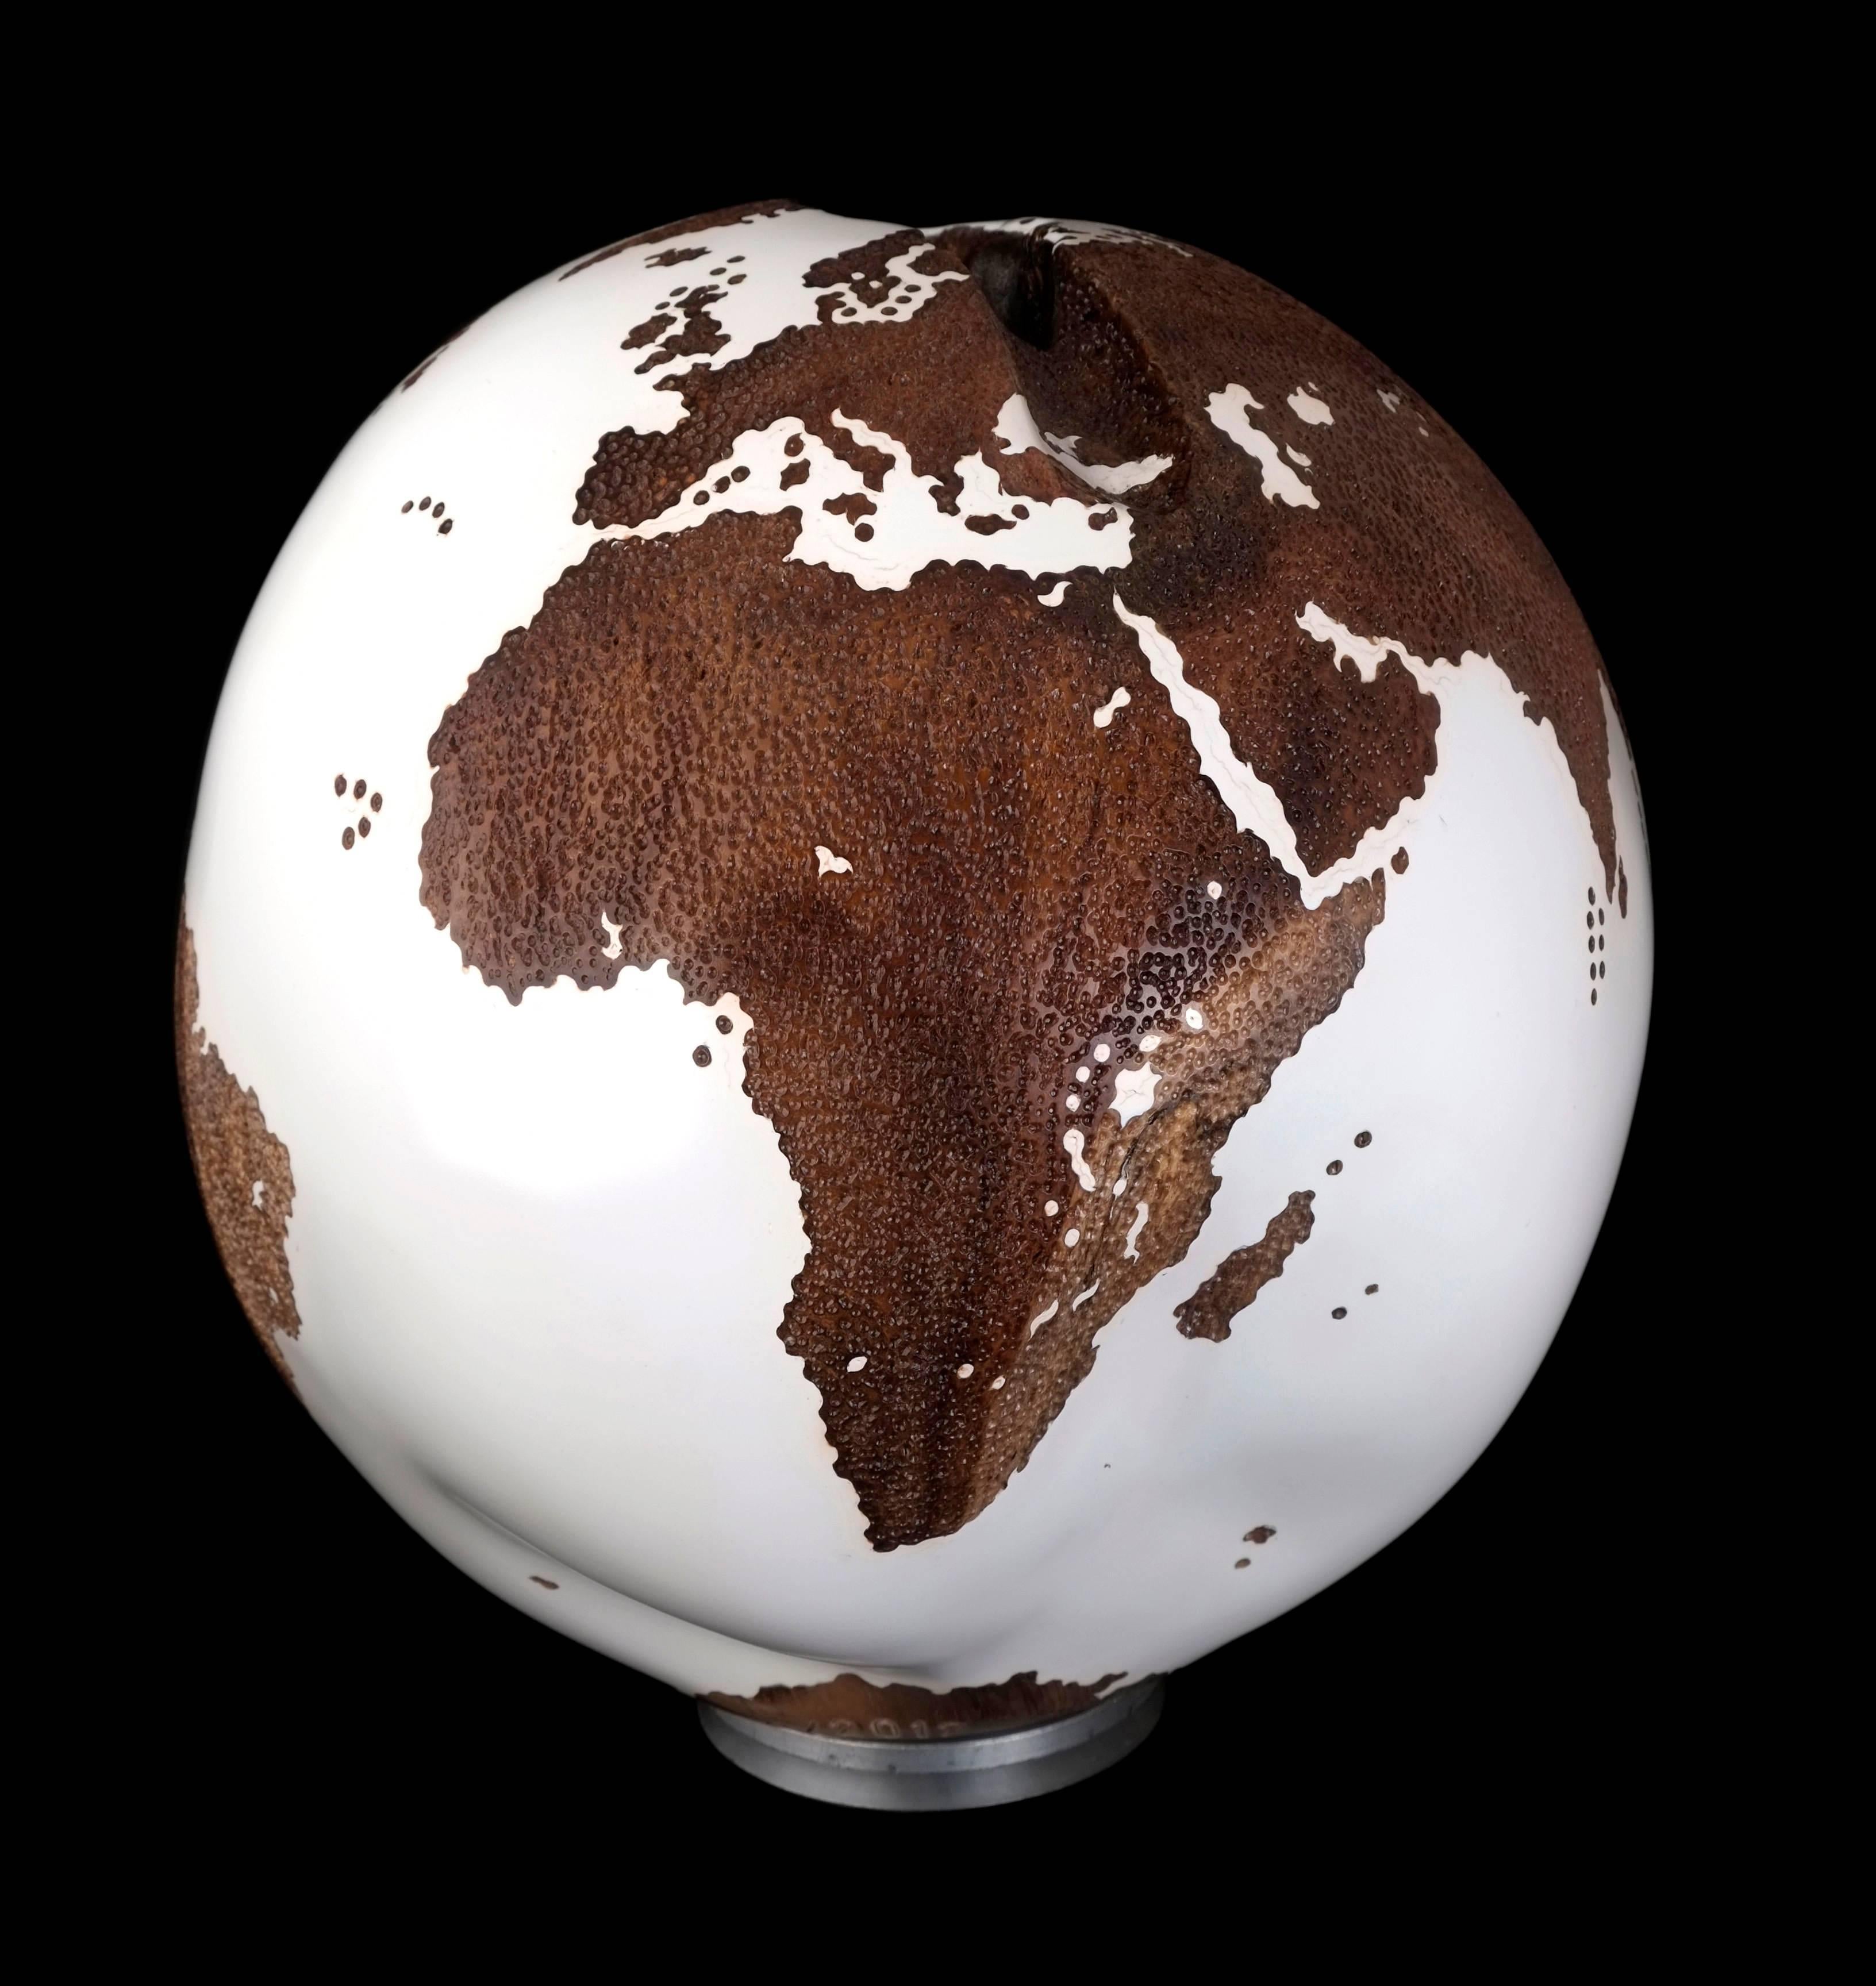 Add warmth and texture to your space with this unique hand-carved wooden globe made of teak root in acrylic white resin and hammered skin textured finishing. 

Dimension: 9.84 inches / 25 cm
Materials: Reclaimed teak root, acrylic white resin,